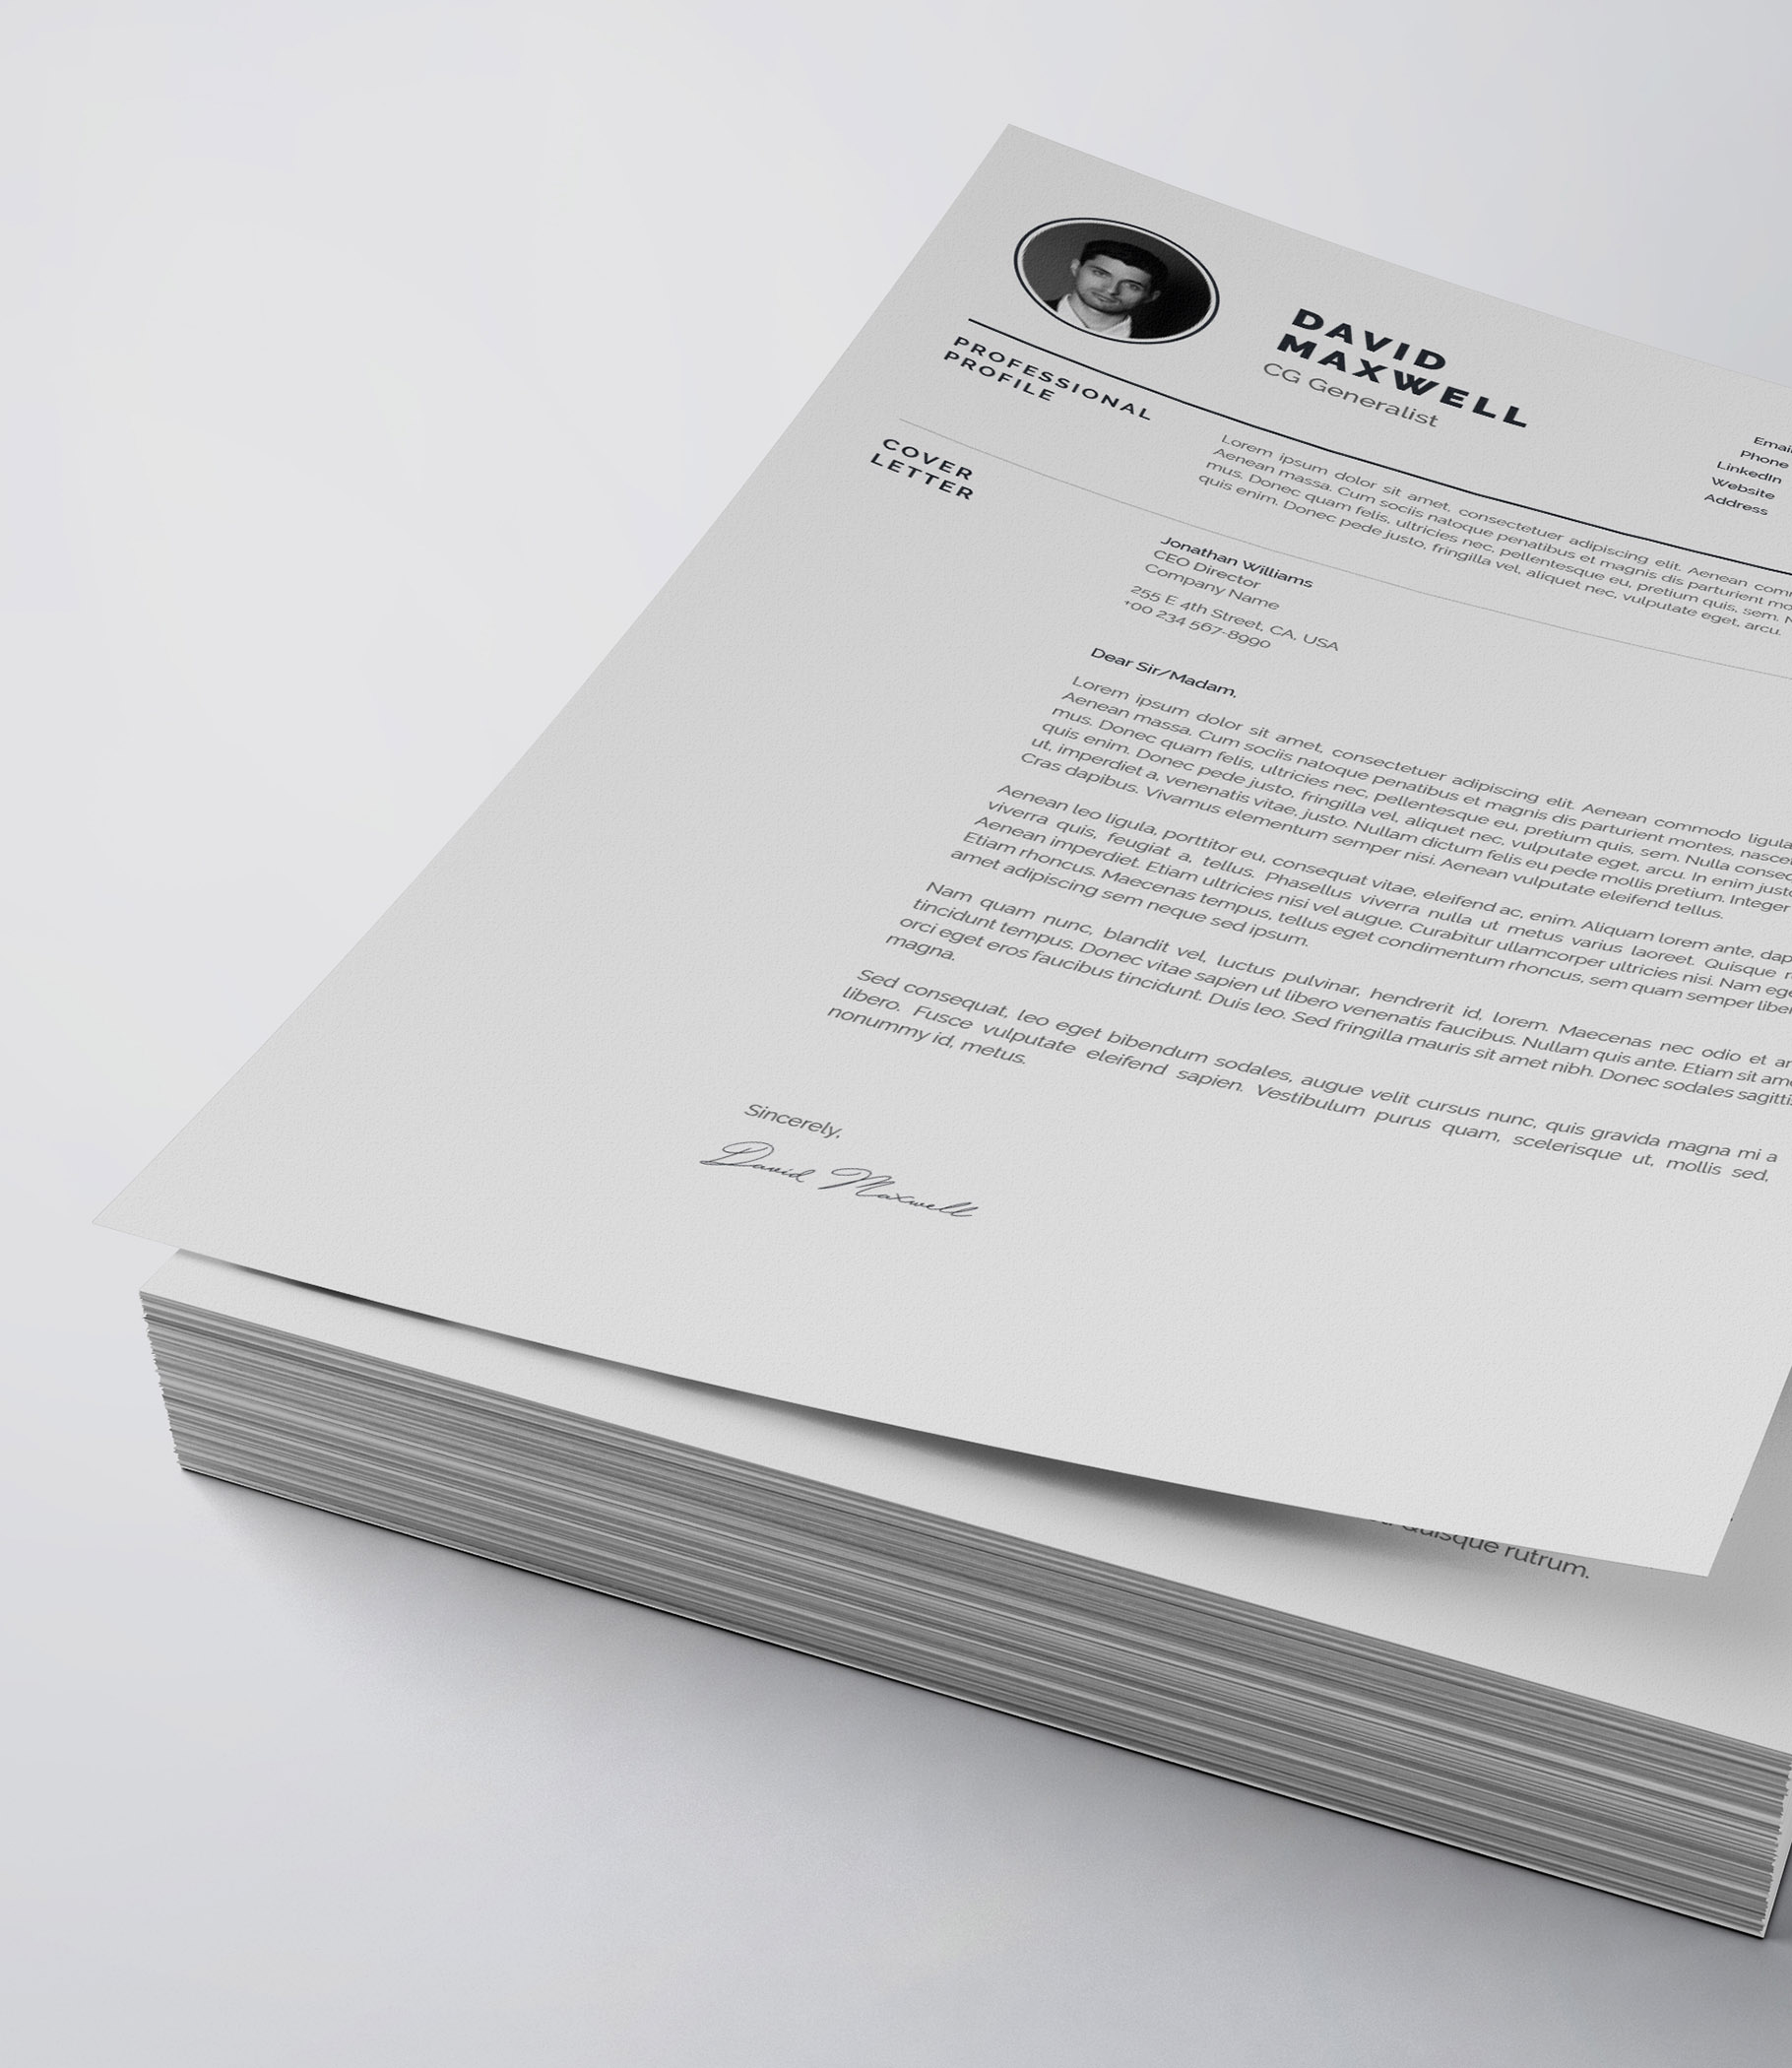 White cover letter sitting on top of a stack of papers.